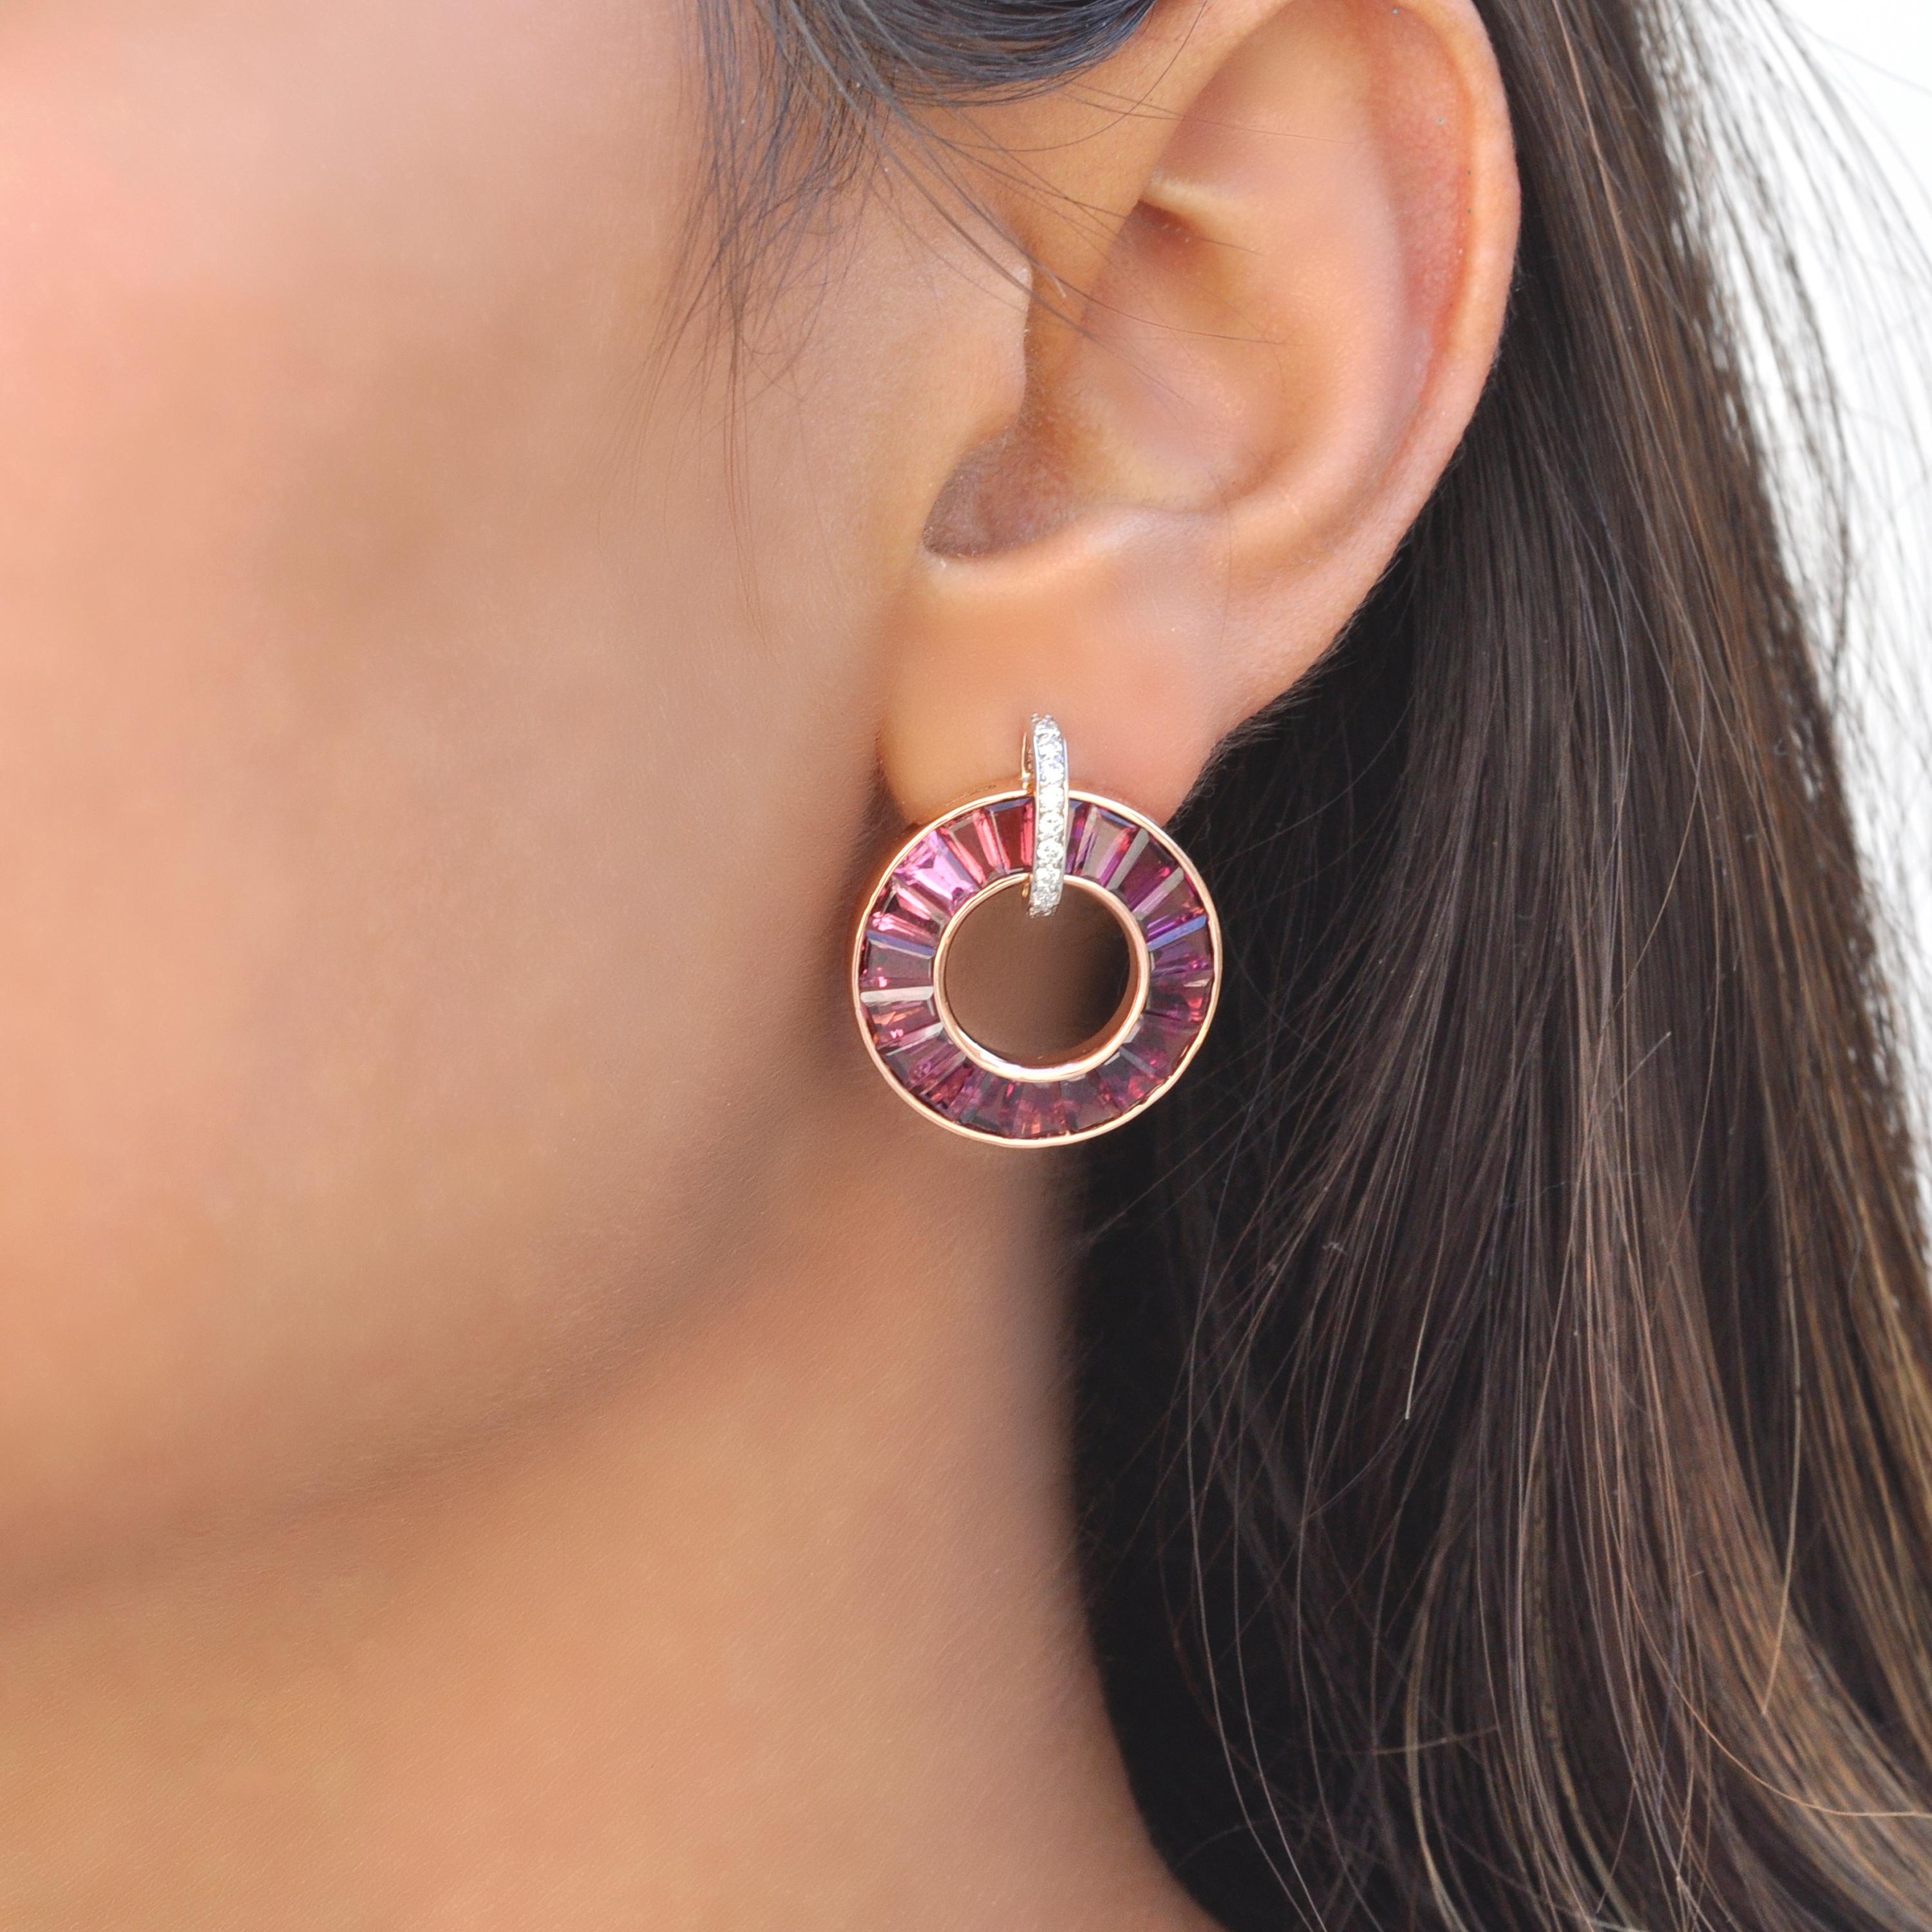 18K rose gold rhodolite garnet diamond circle earrings are fusion of opulence and sophistication. Crafted in lustrous 18-karat rose gold, these earrings feature tapered baguettes rhodolites cradled in a loop adorned with pave-set diamonds, creating